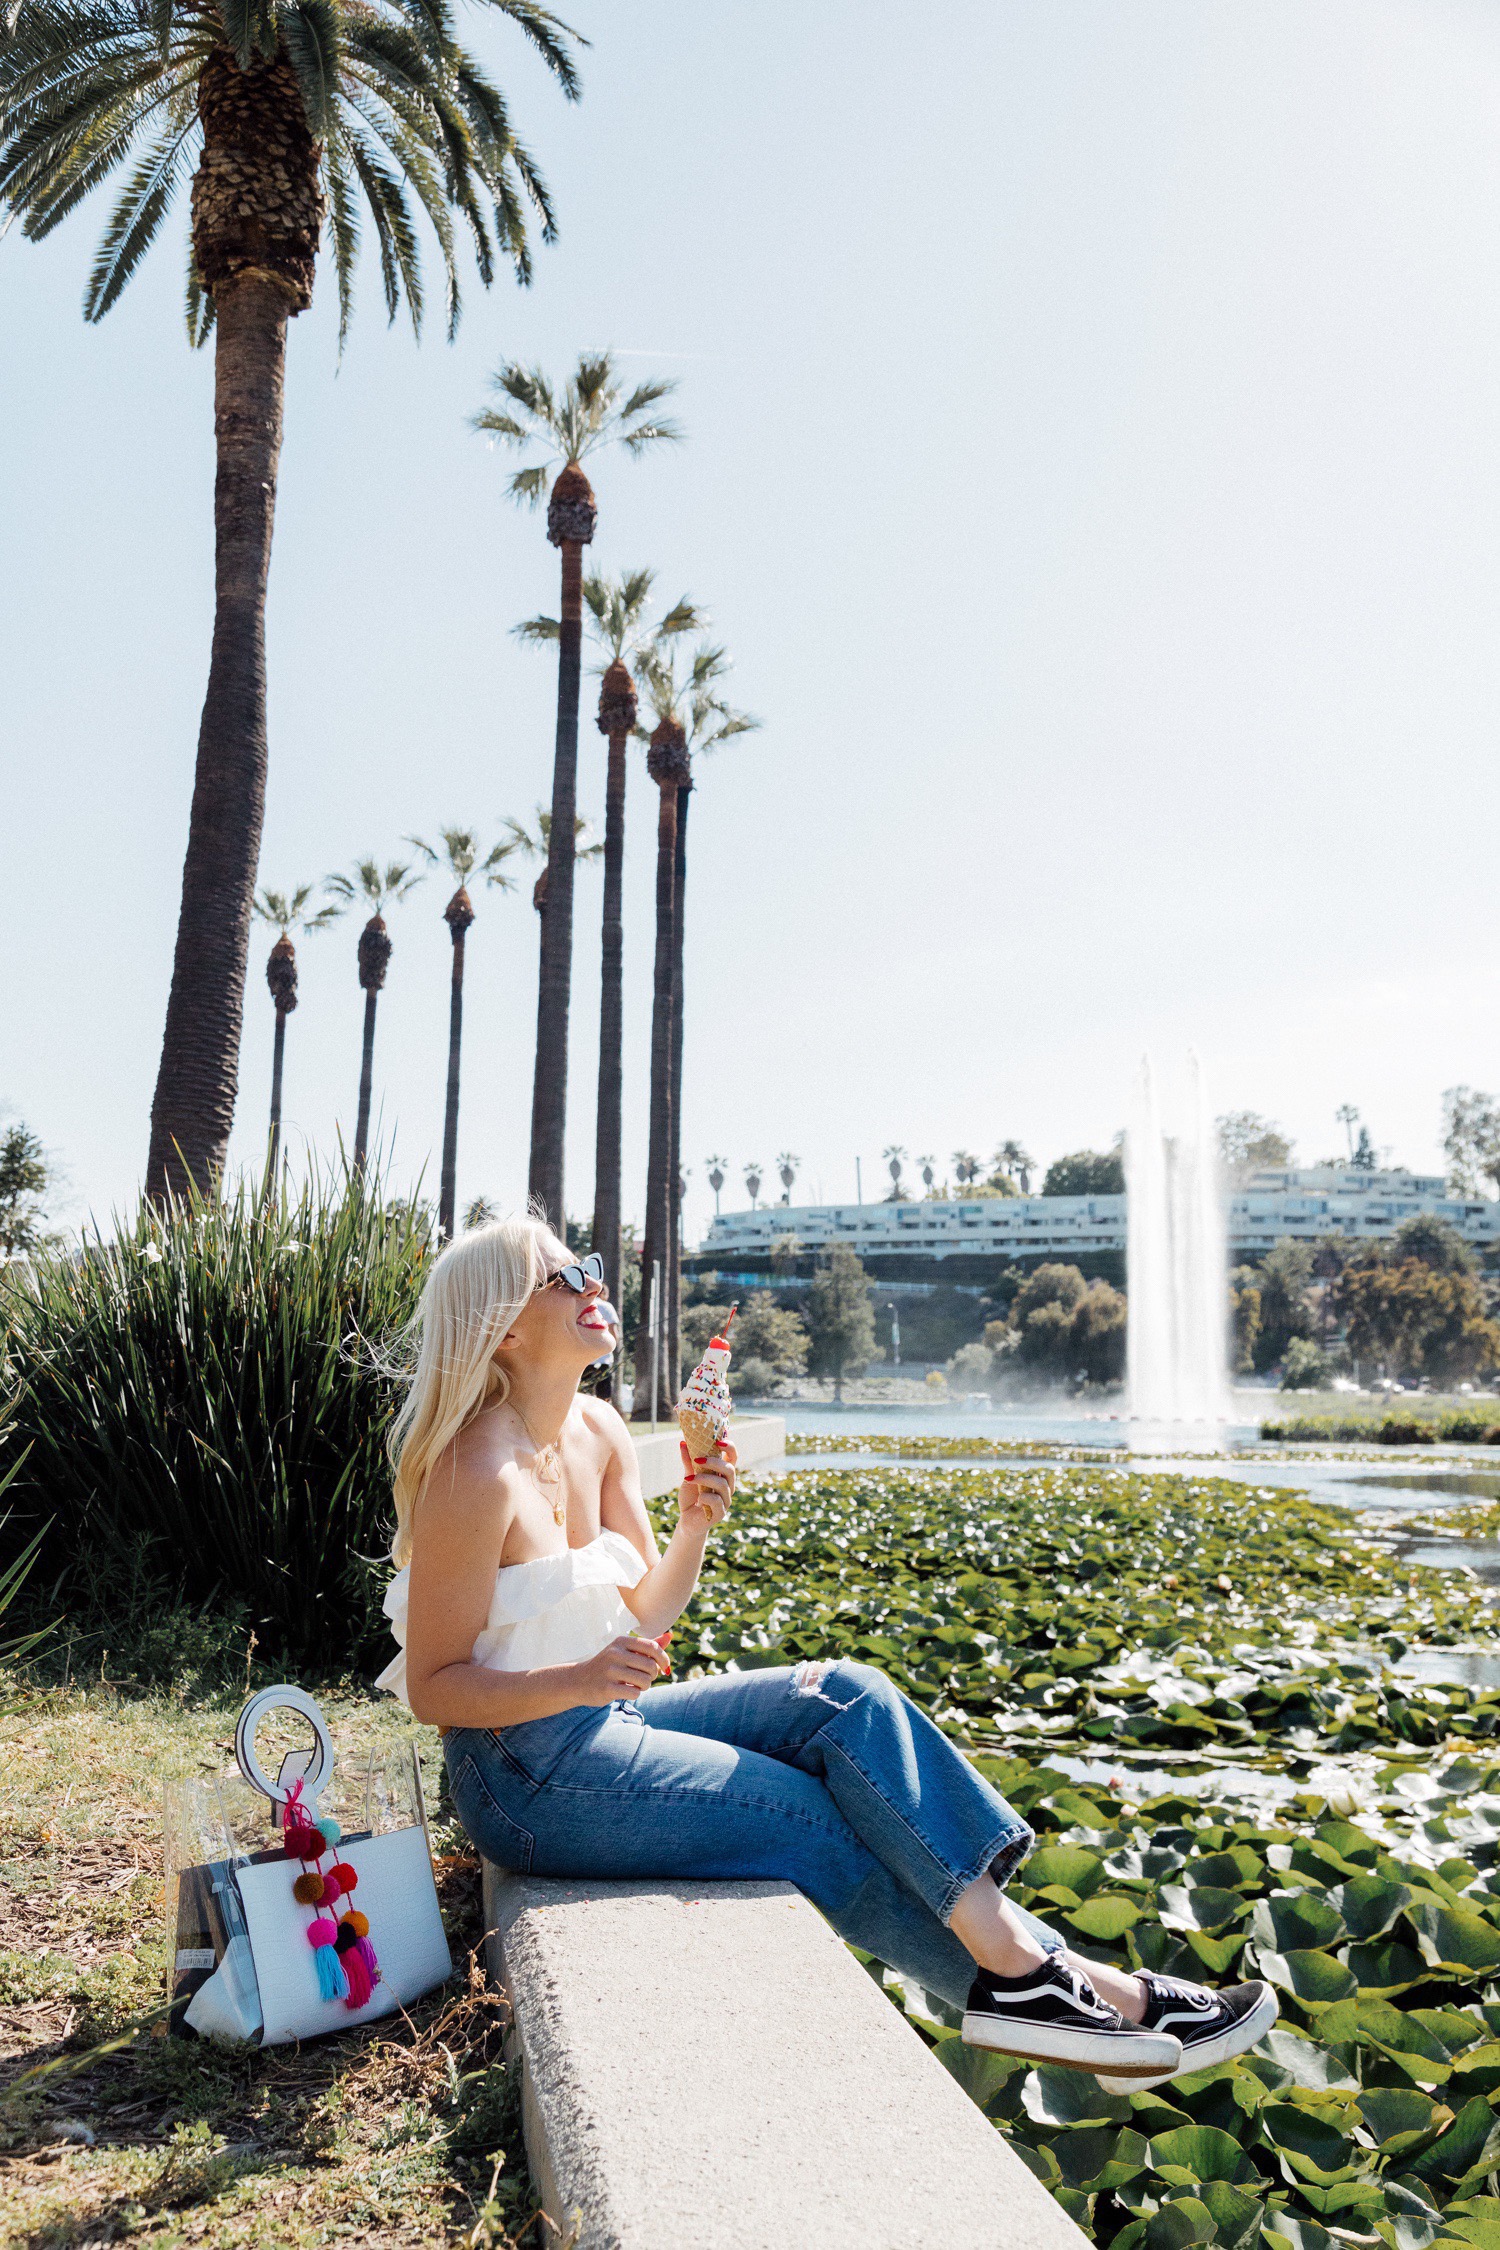 Things to Do at Echo Park Lake - Love & Loathing Los Angeles